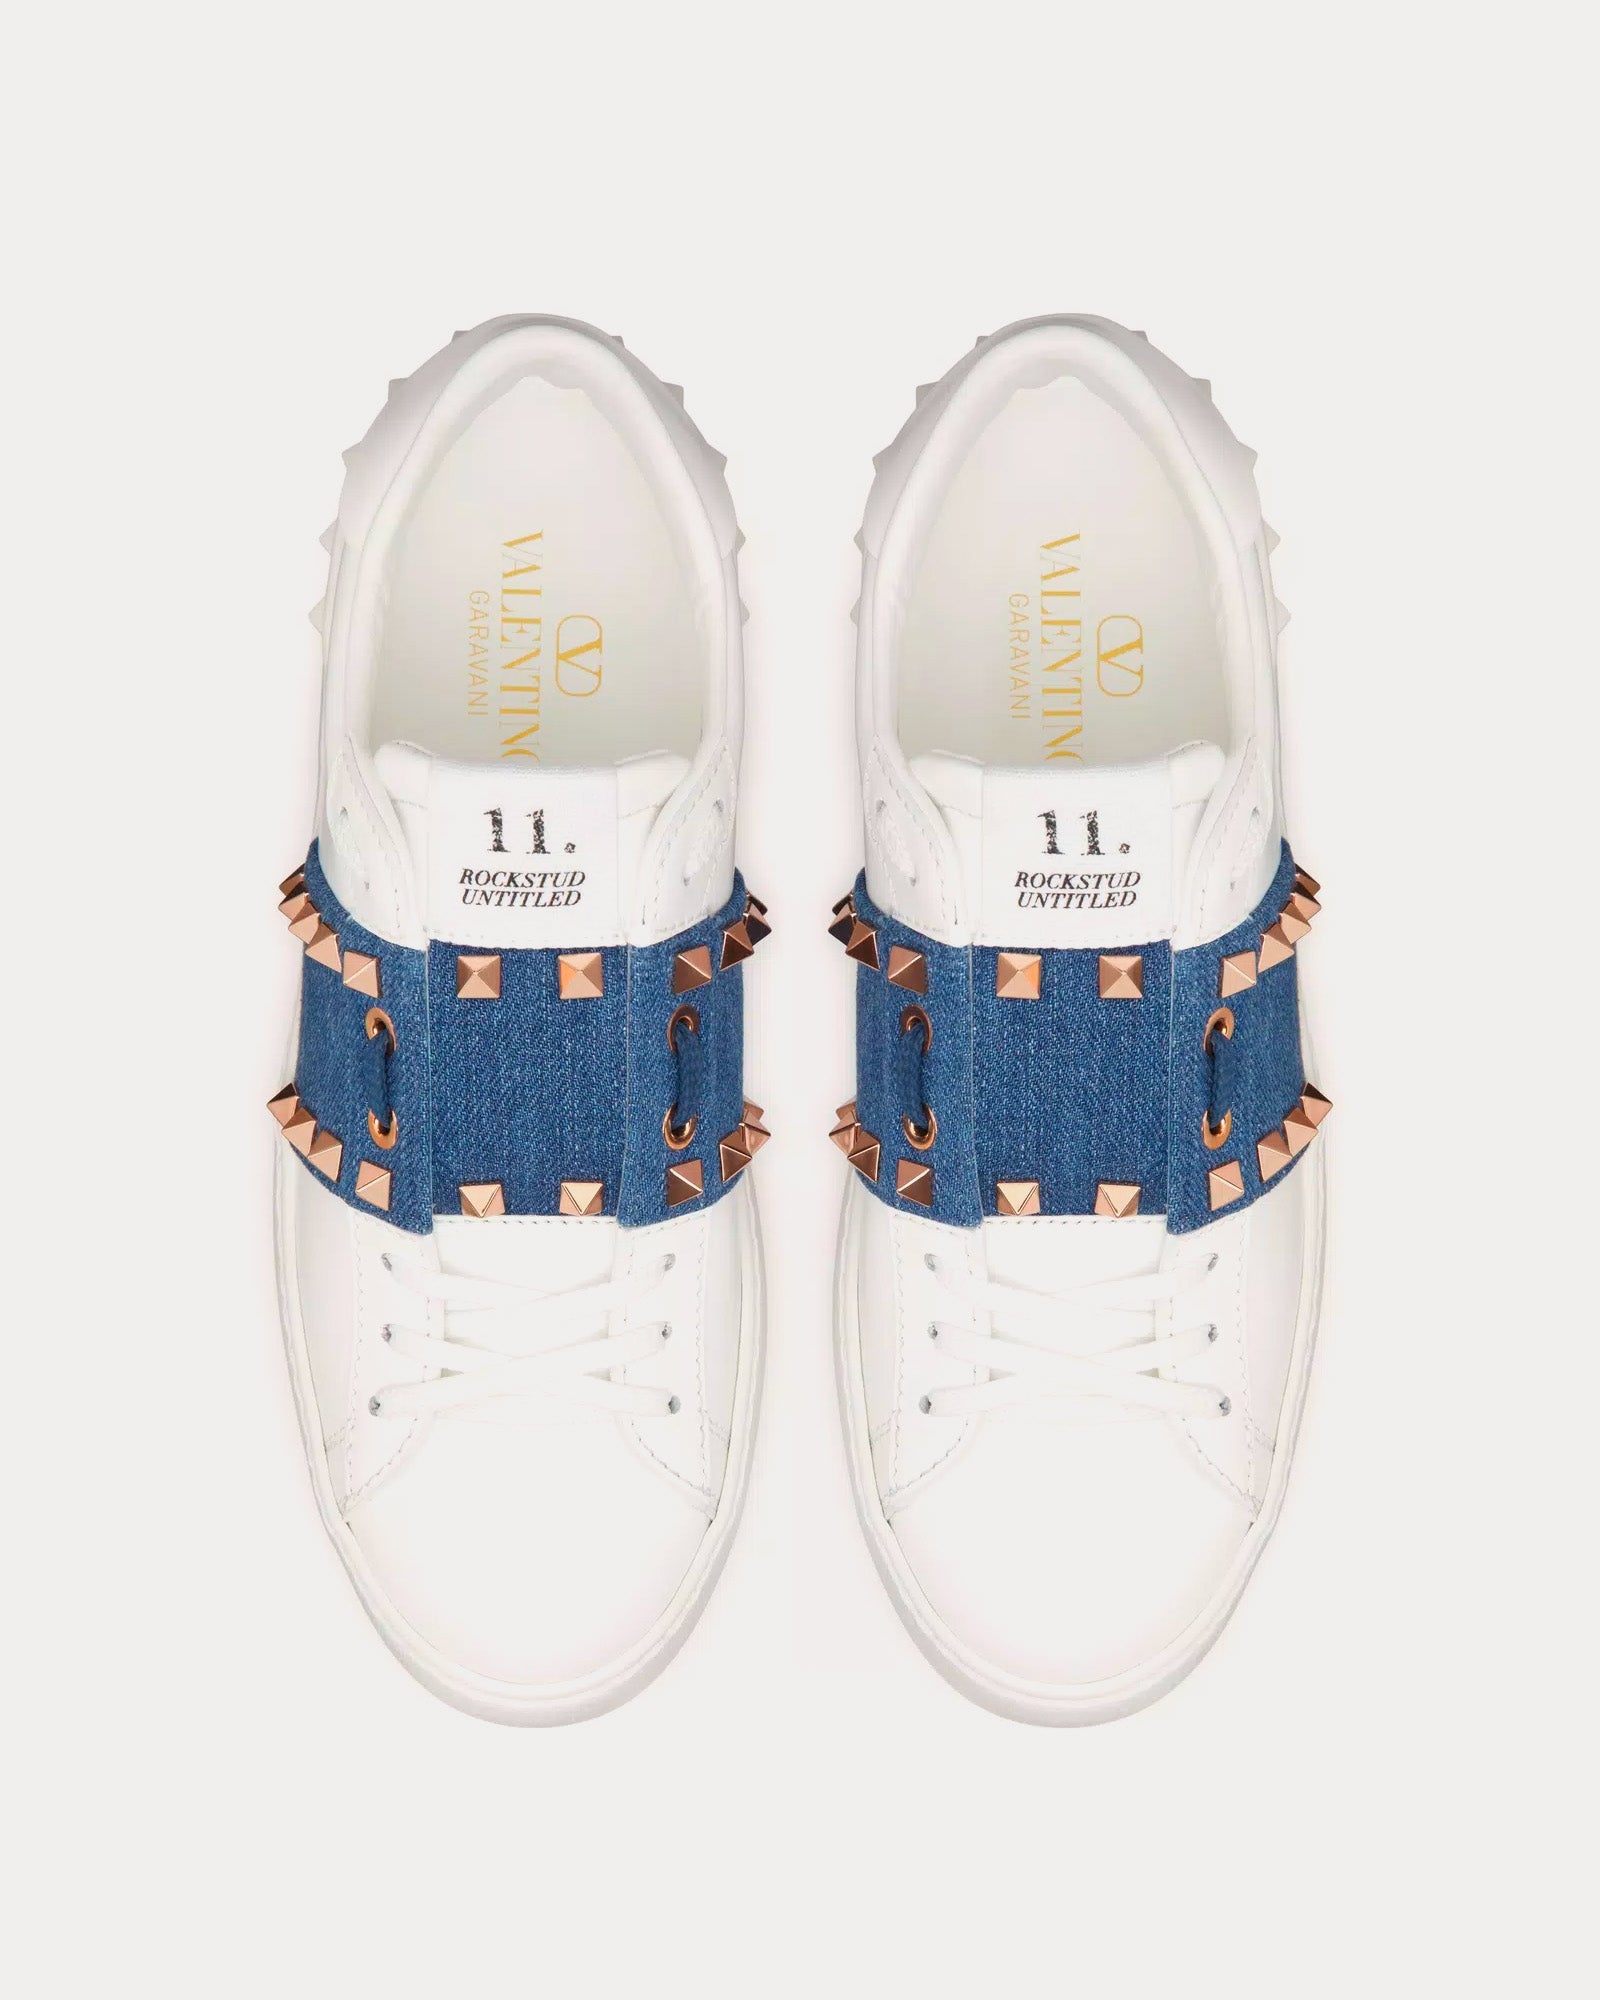 Valentino - Rockstud Untitled Calfskin with Denim Band White / Denim Low Top Sneakers